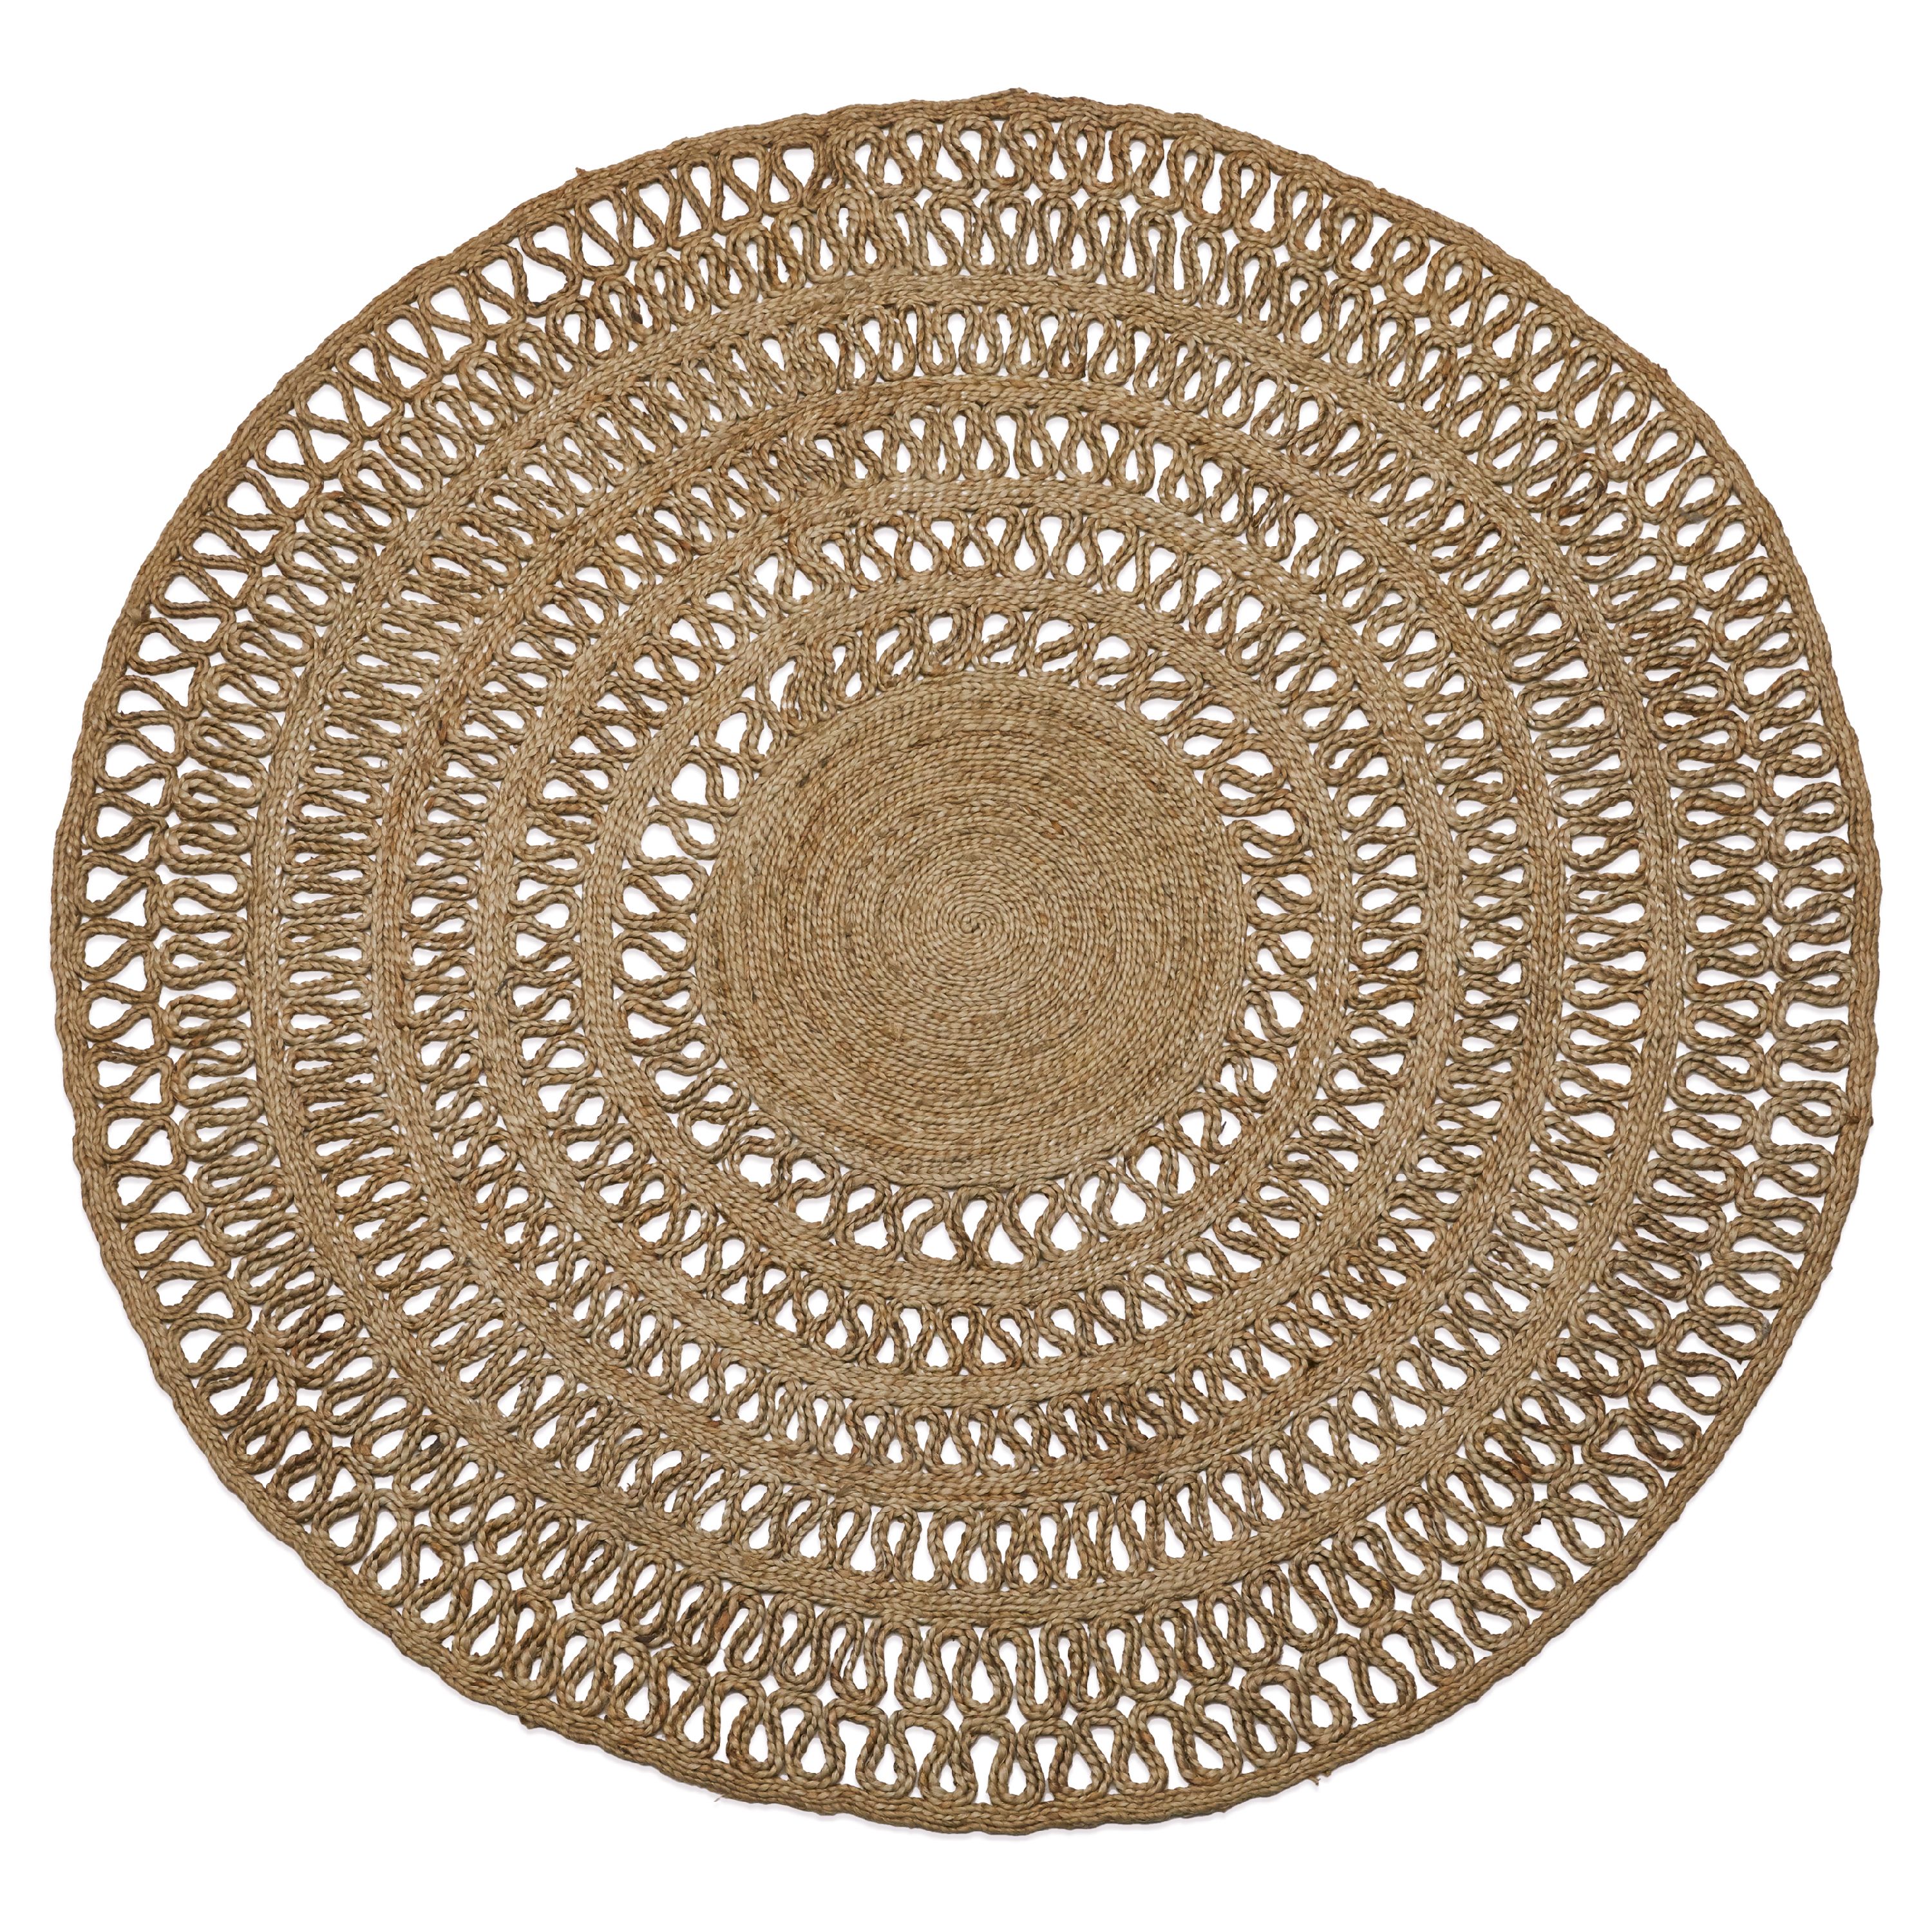 Round Jute Area Rug by Drew Barrymore Flower Home - image 1 of 5